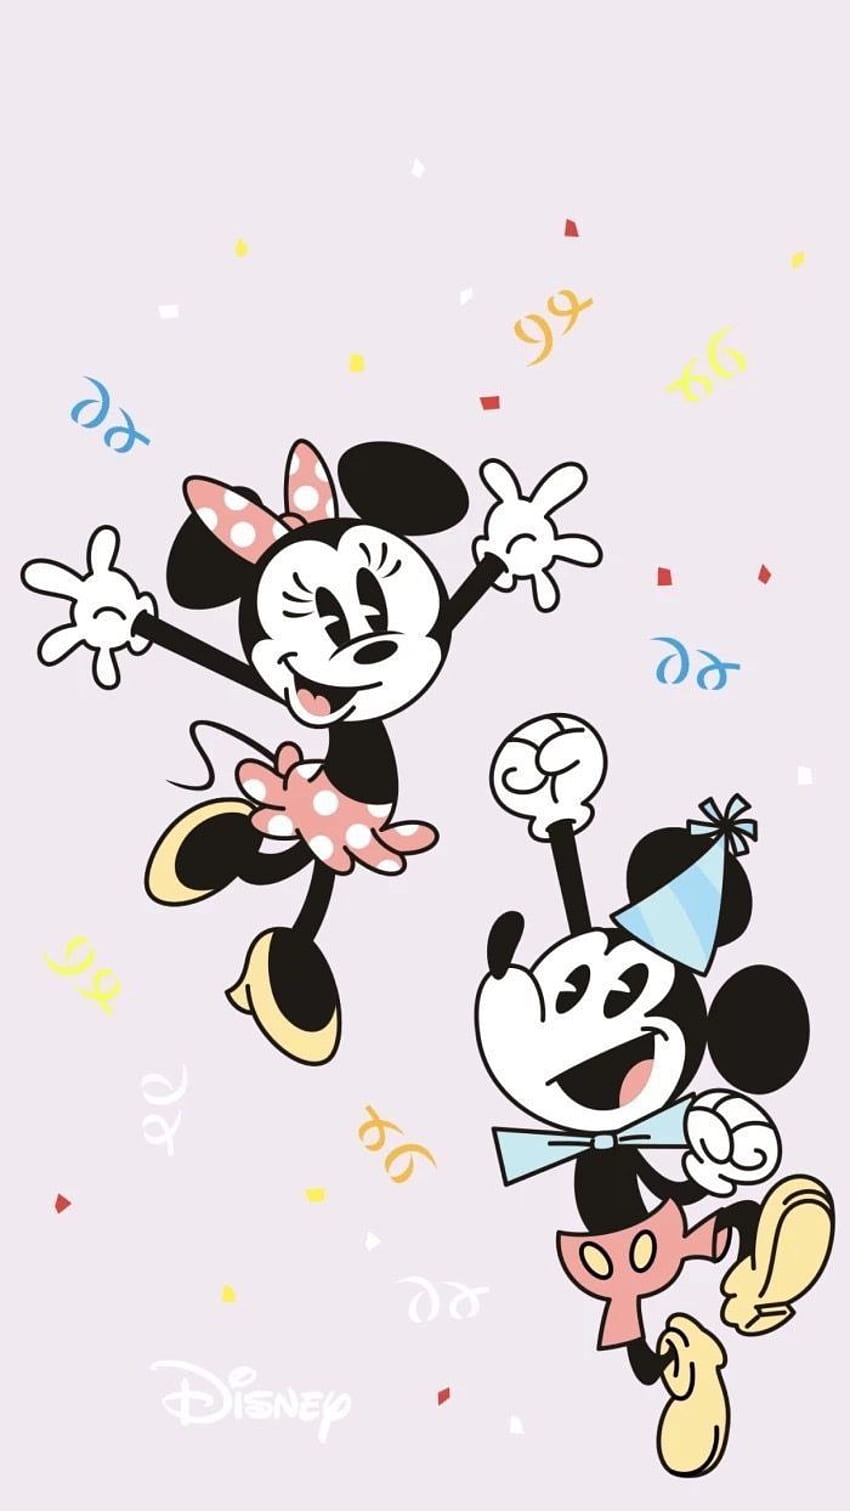 Minnie and Mickey Mouse Wallpapers (56+ pictures)